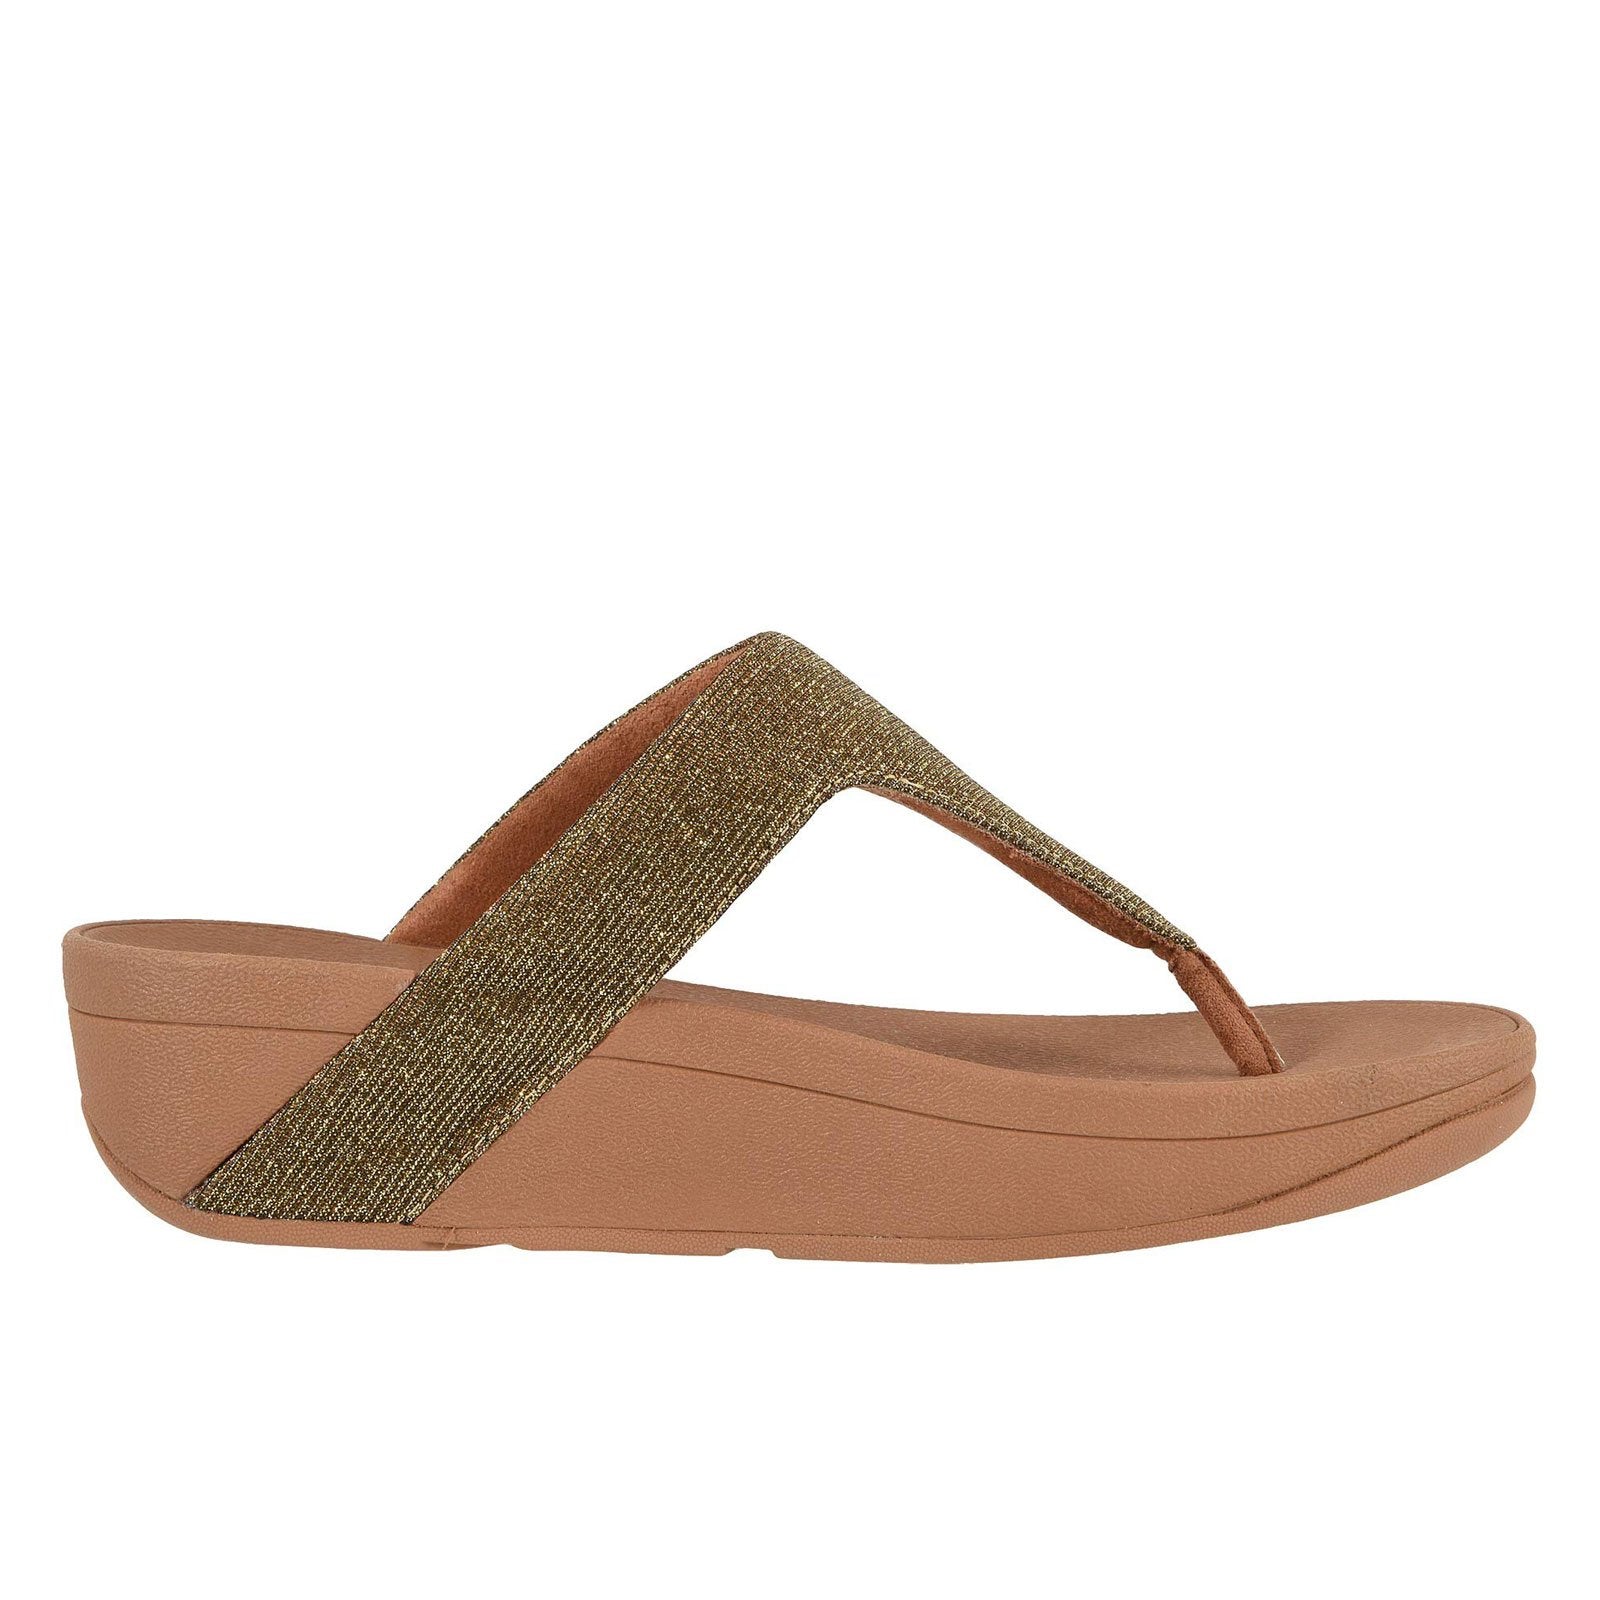 Fitflop Lottie Glitzy Thong R25-667 (Gold)